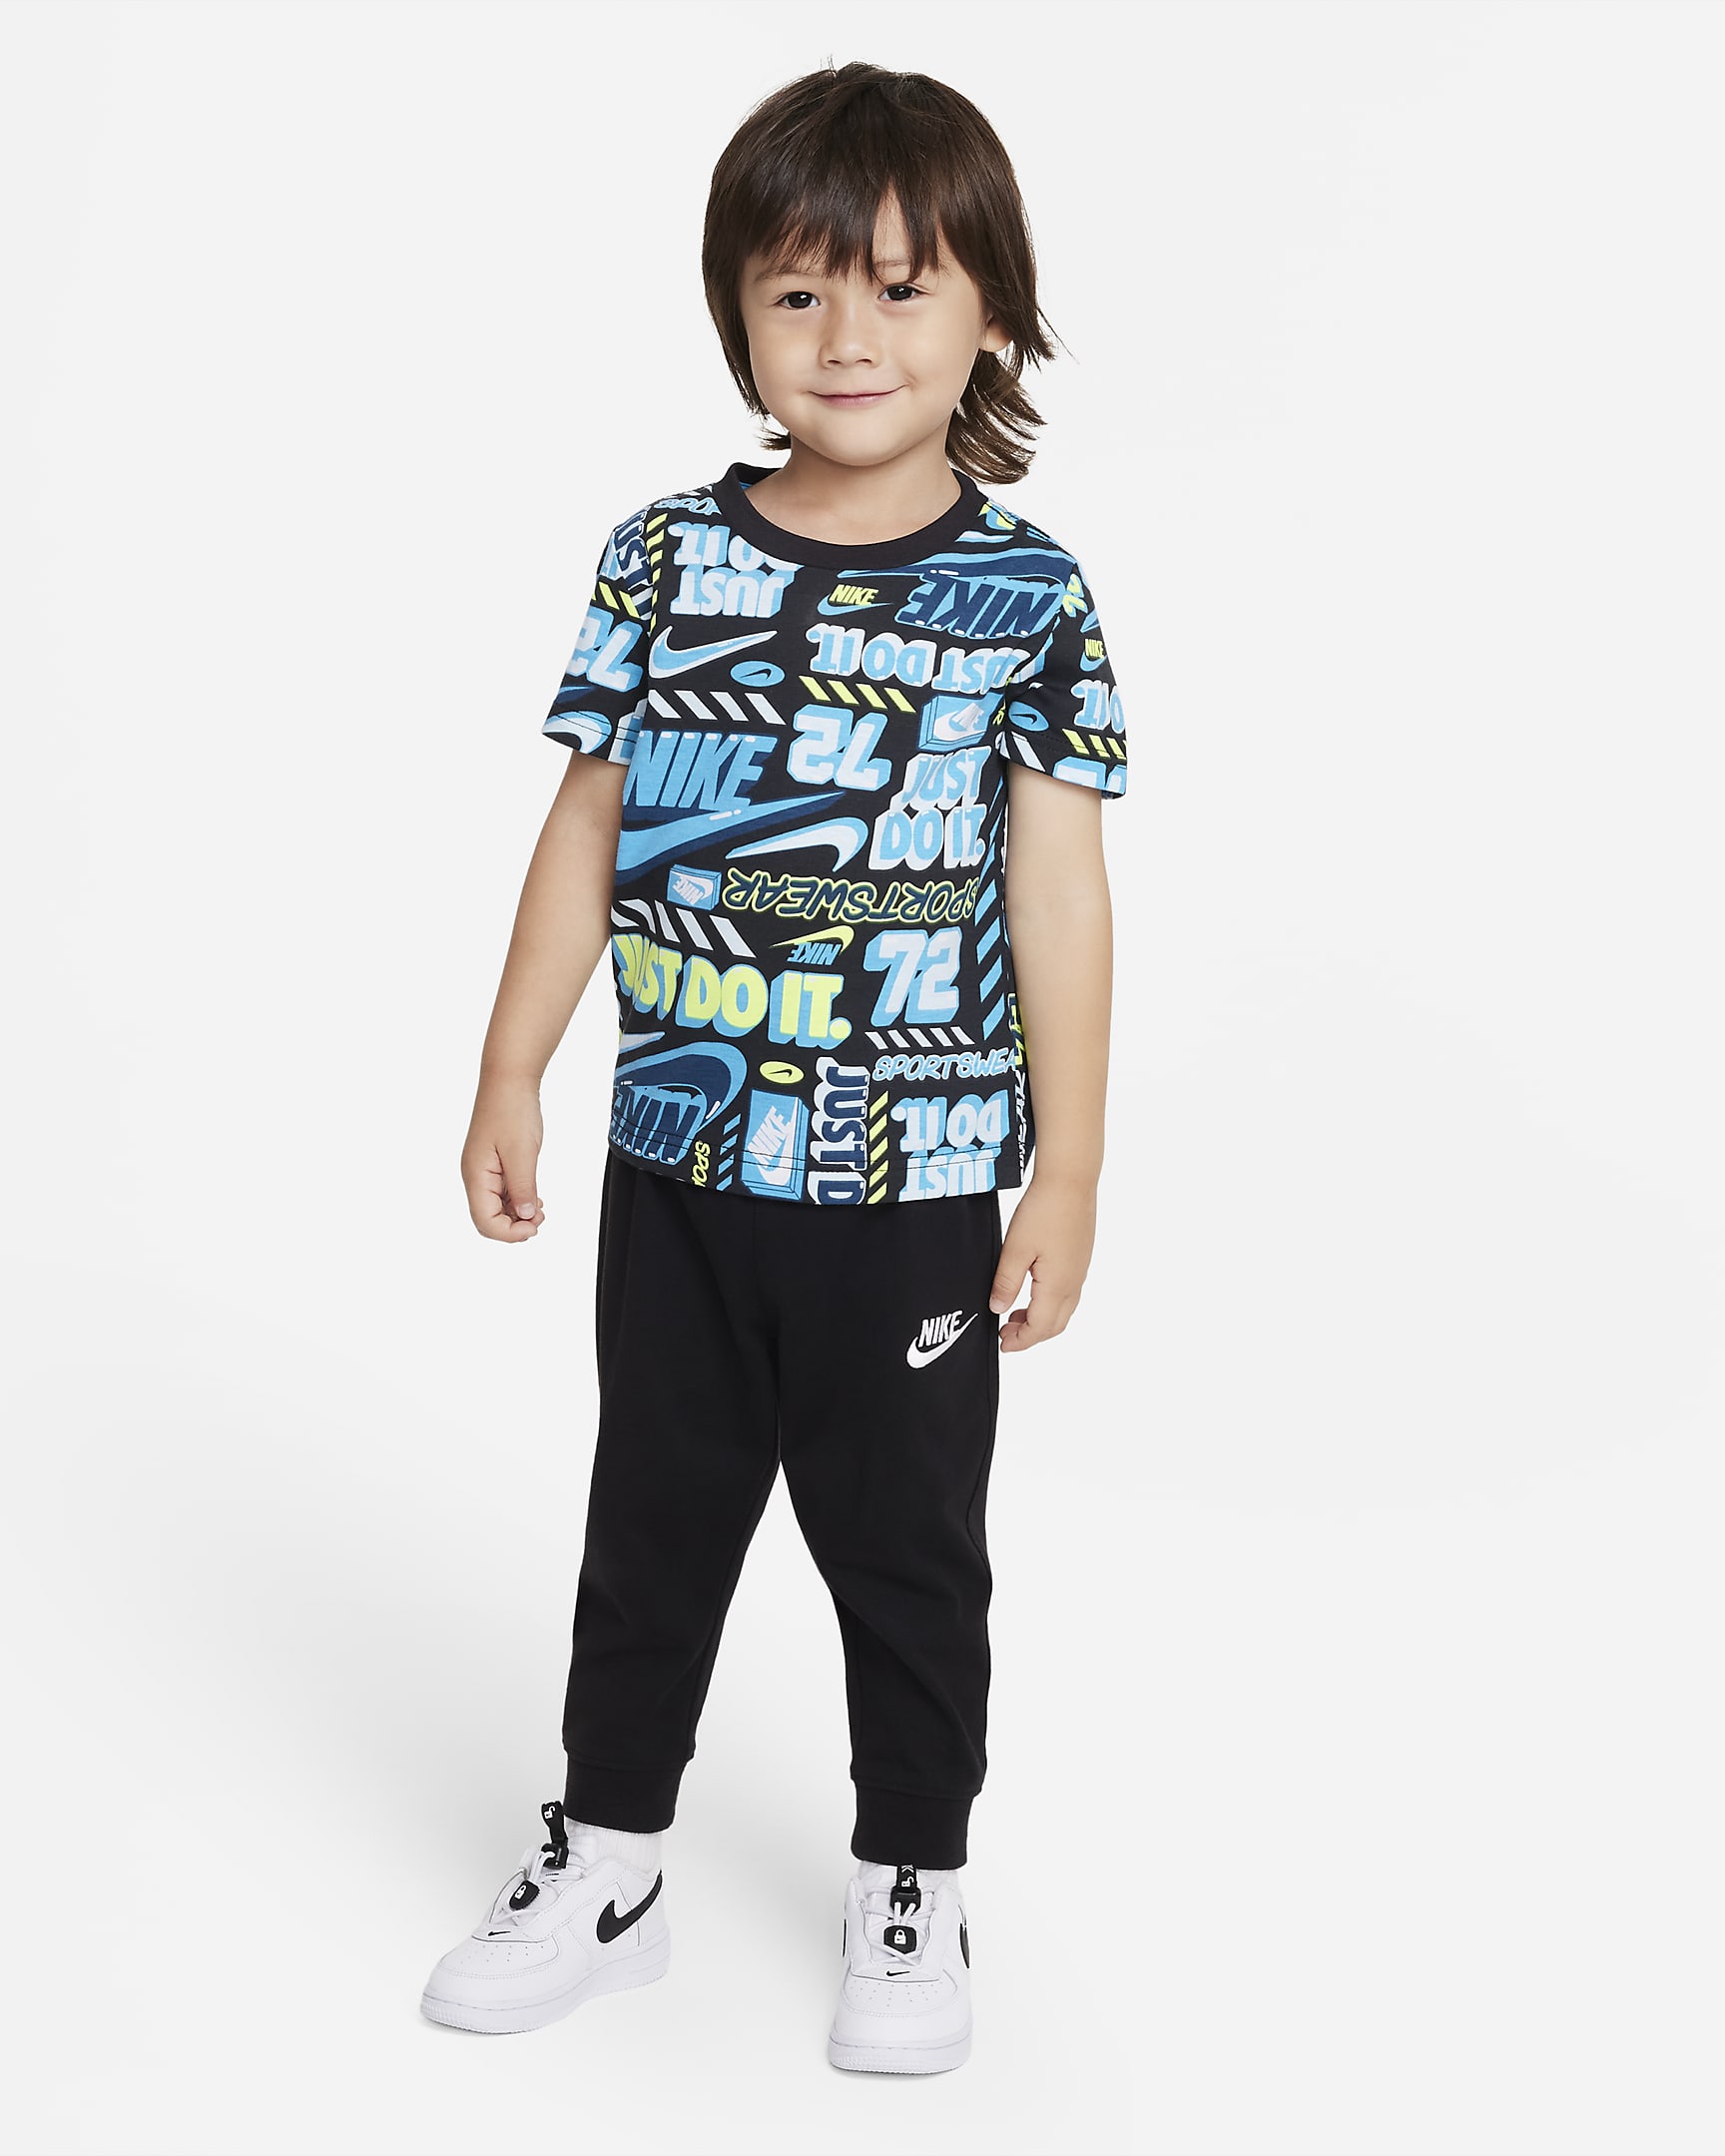 Nike Cool After School Printed Tee Toddler T-Shirt. Nike.com